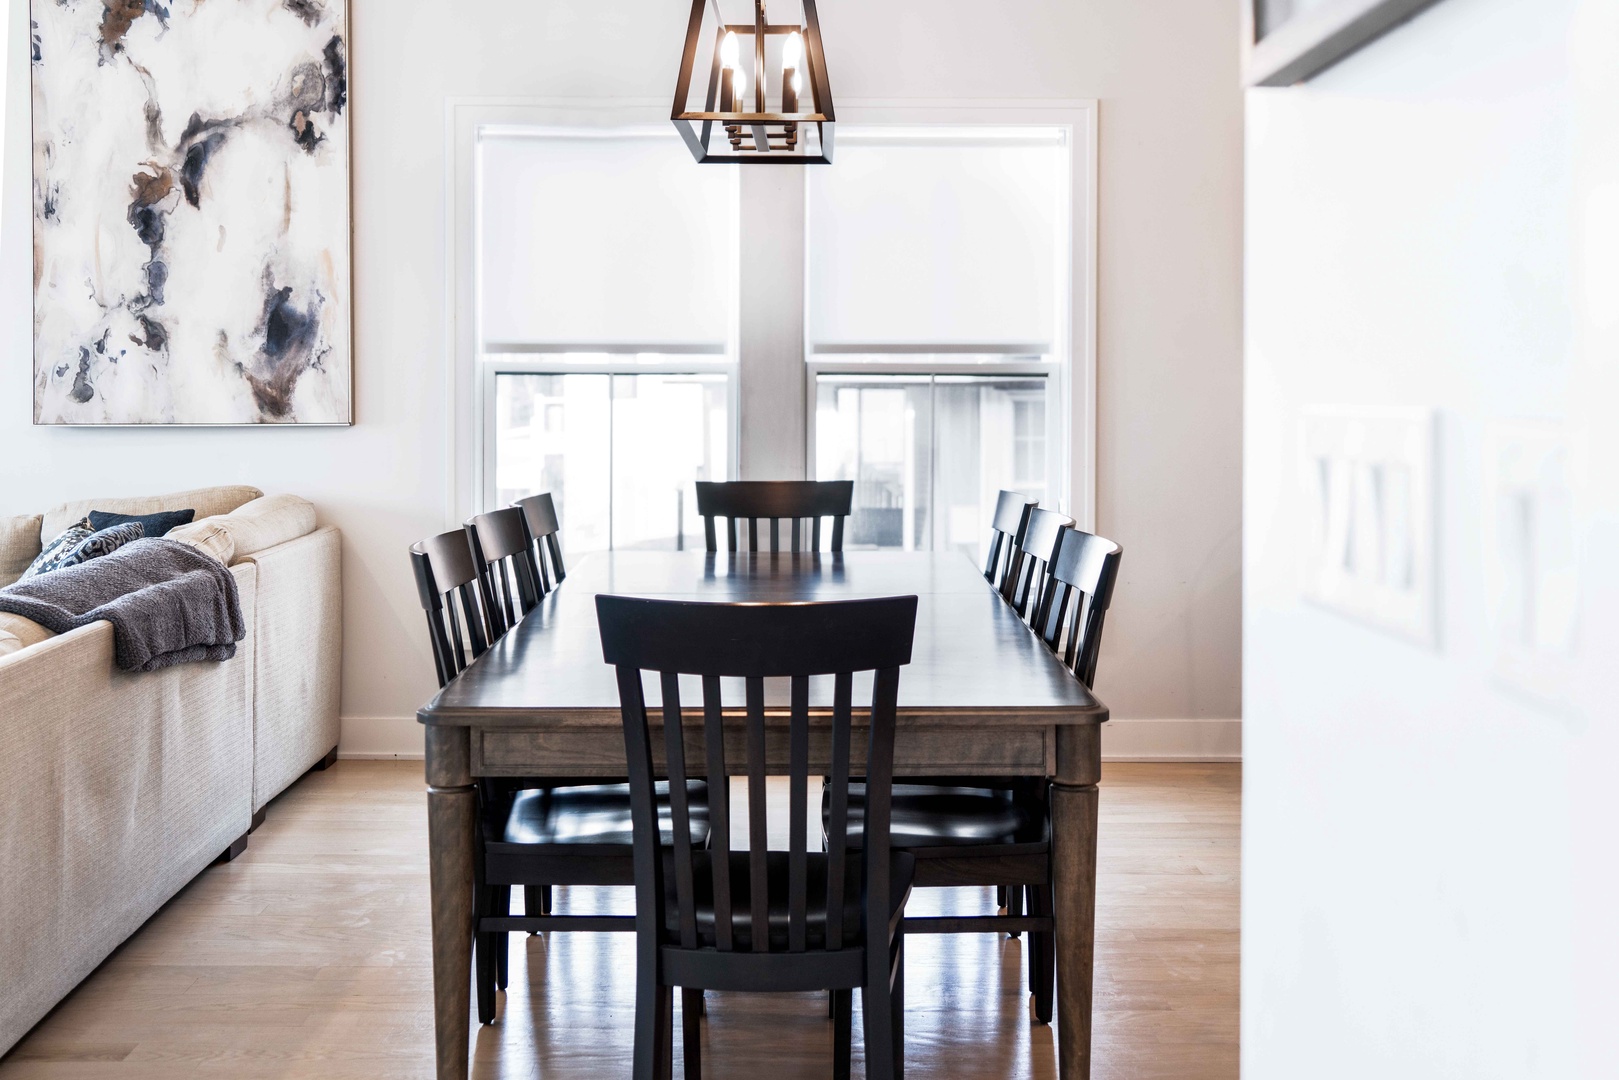 Gather for meals together at the dining table, with seating for 8